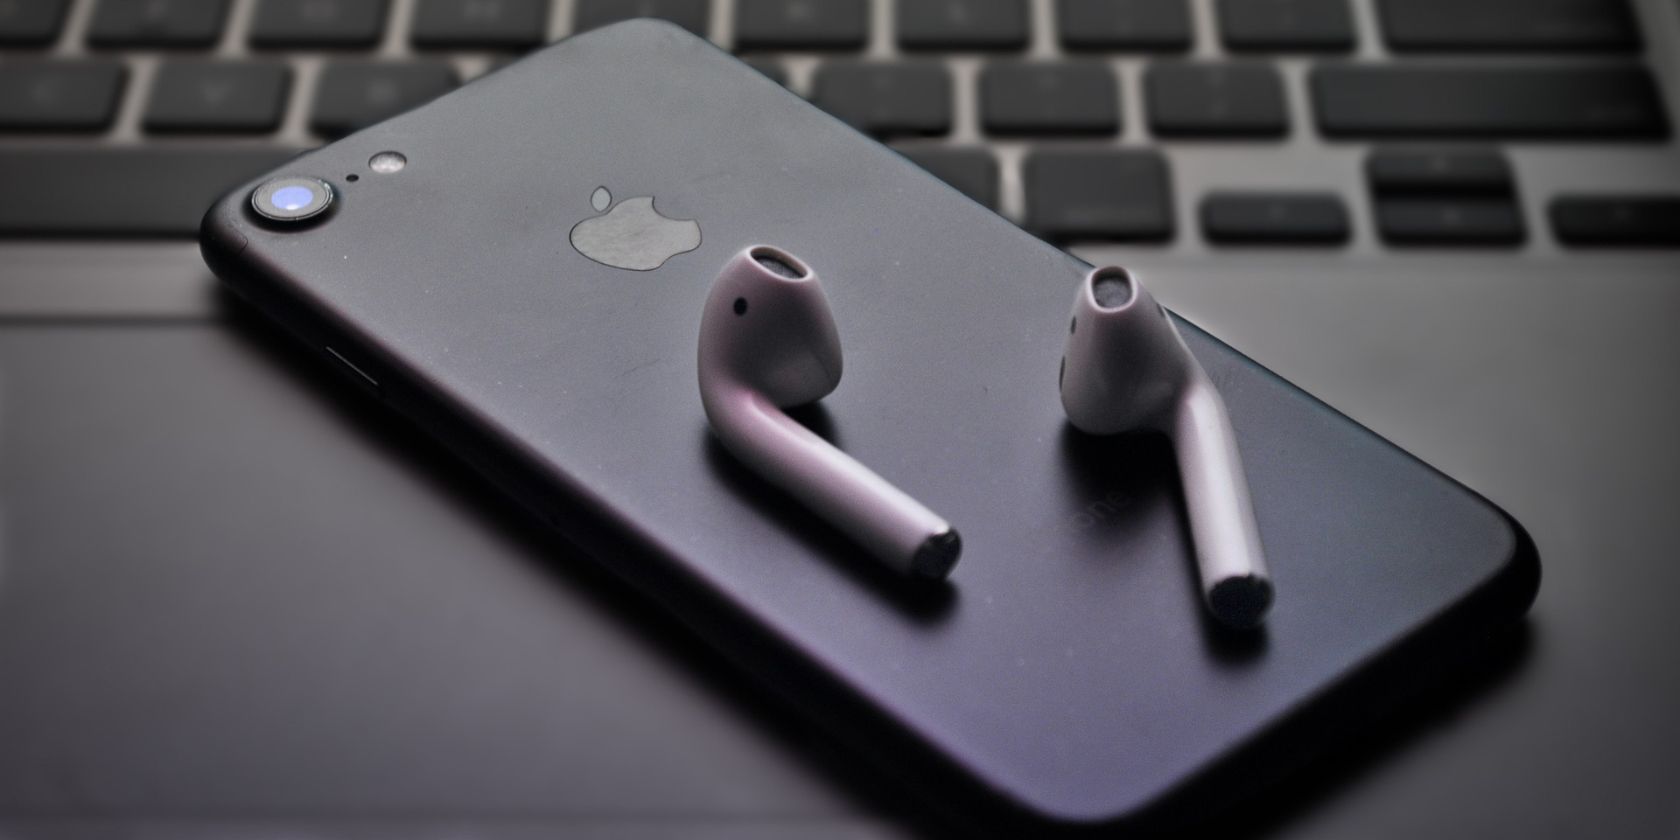 How to Use AirPods: A Beginner's Guide